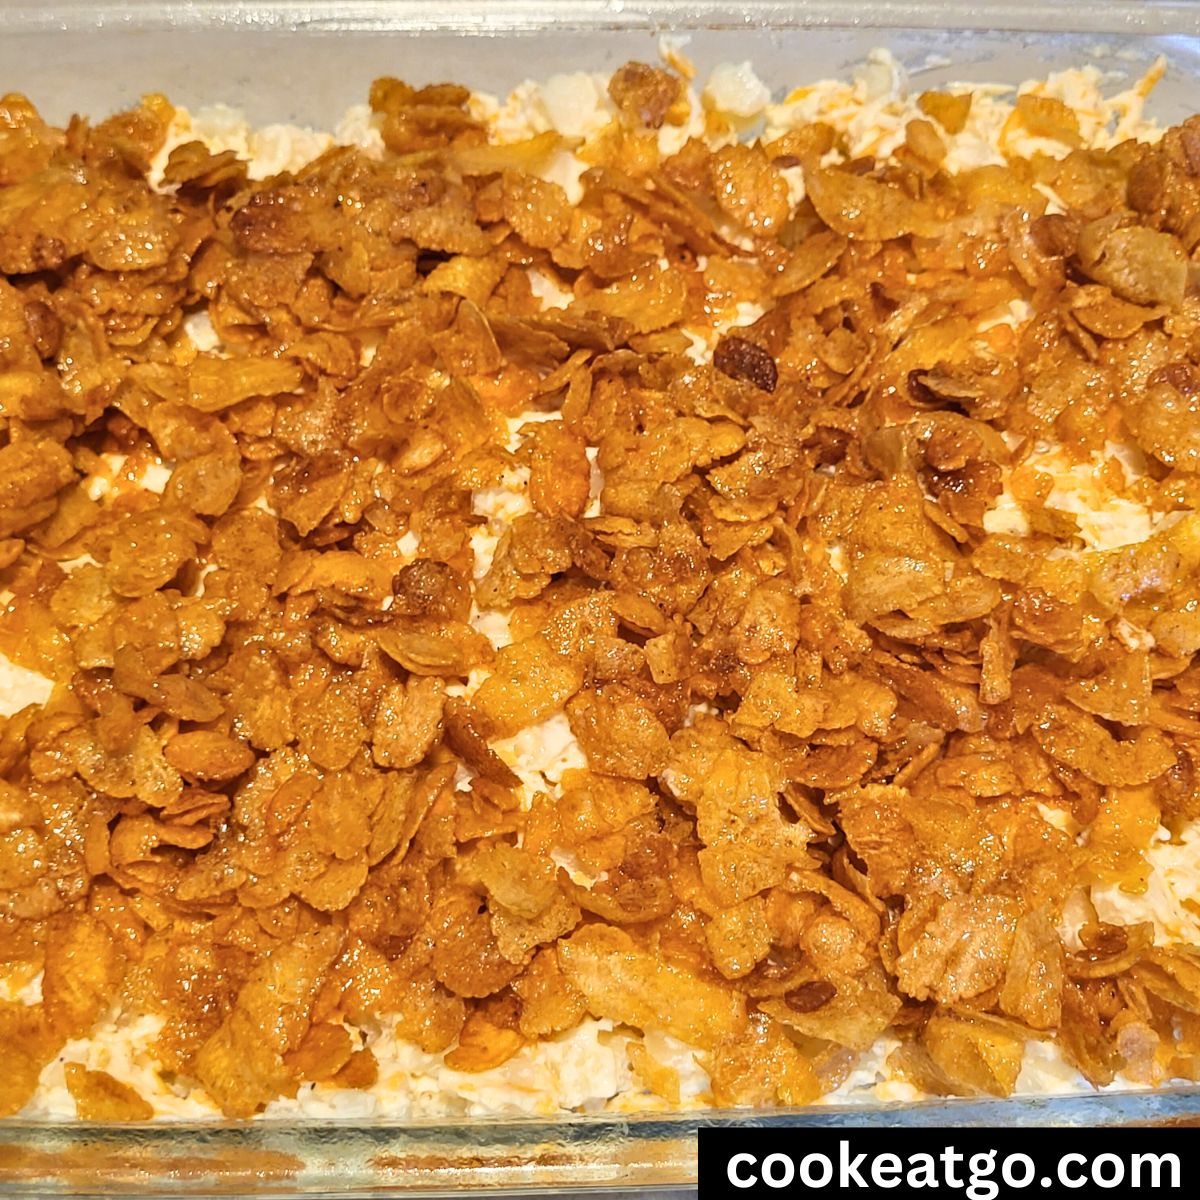 Hashbrown Casserole before baking in oven in a casserole dish